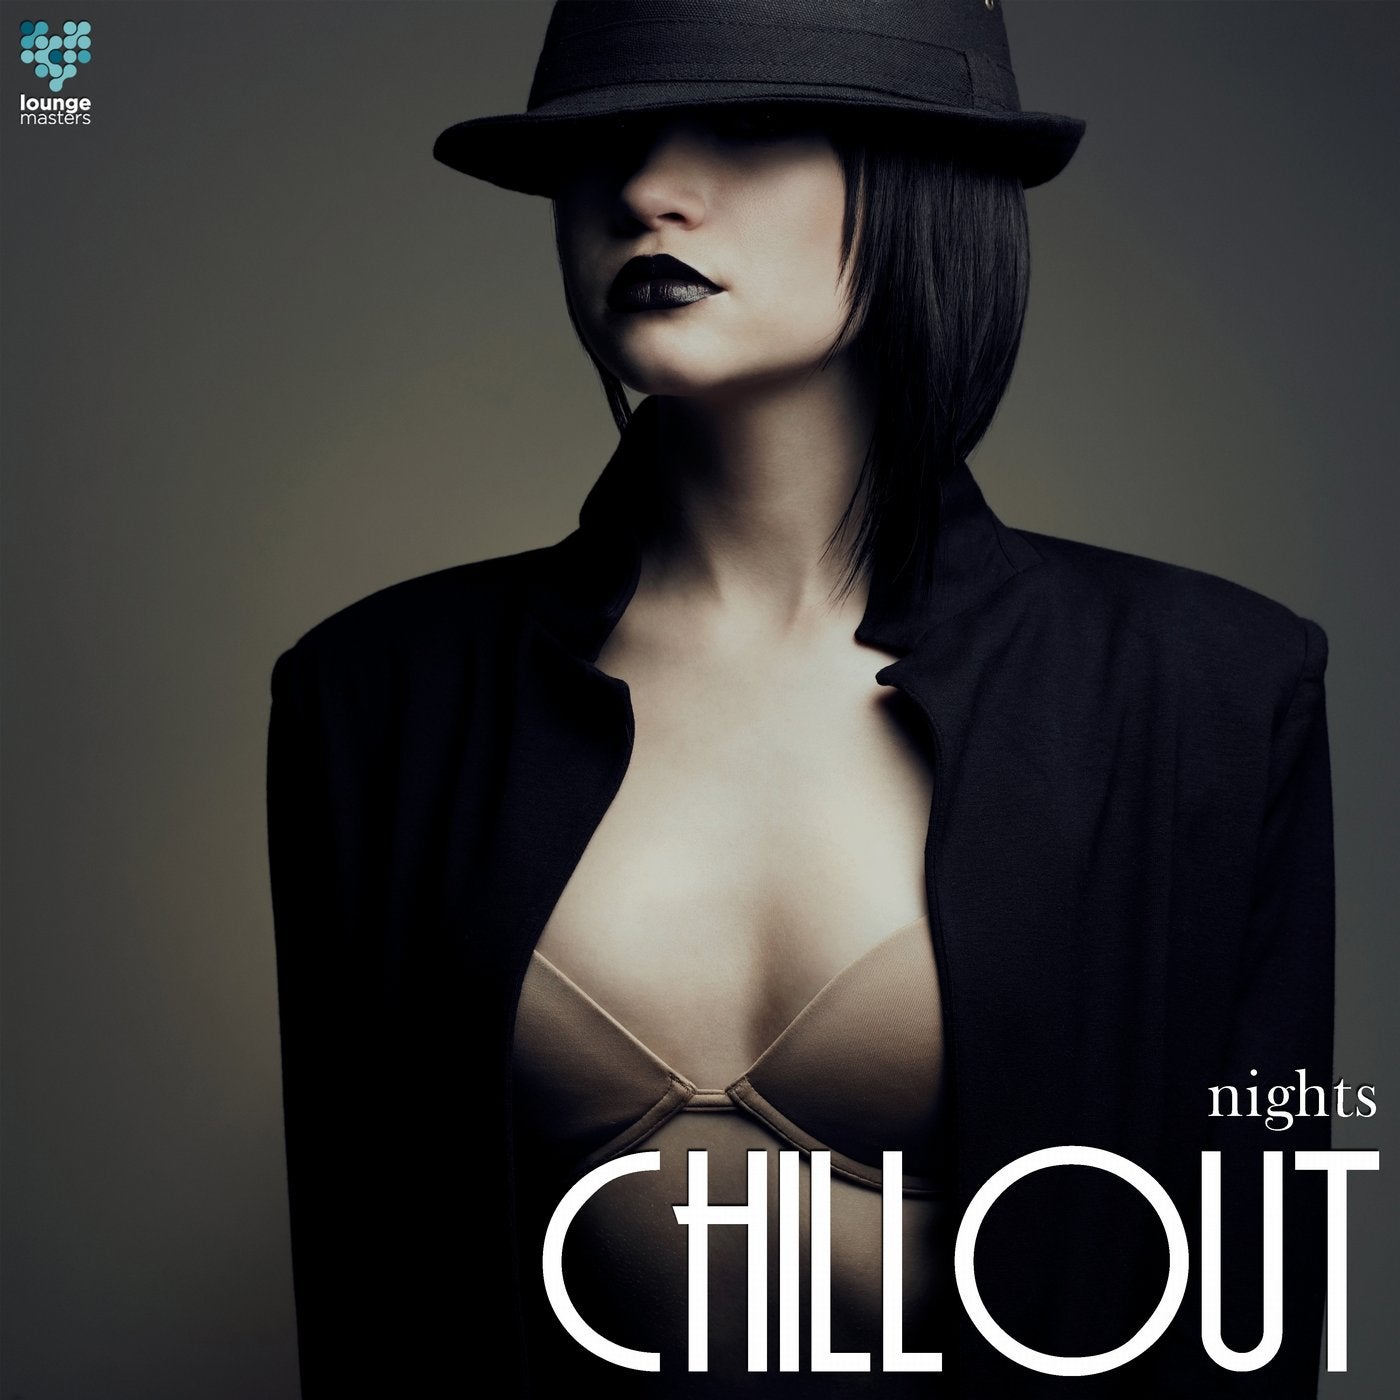 Nights Chillout